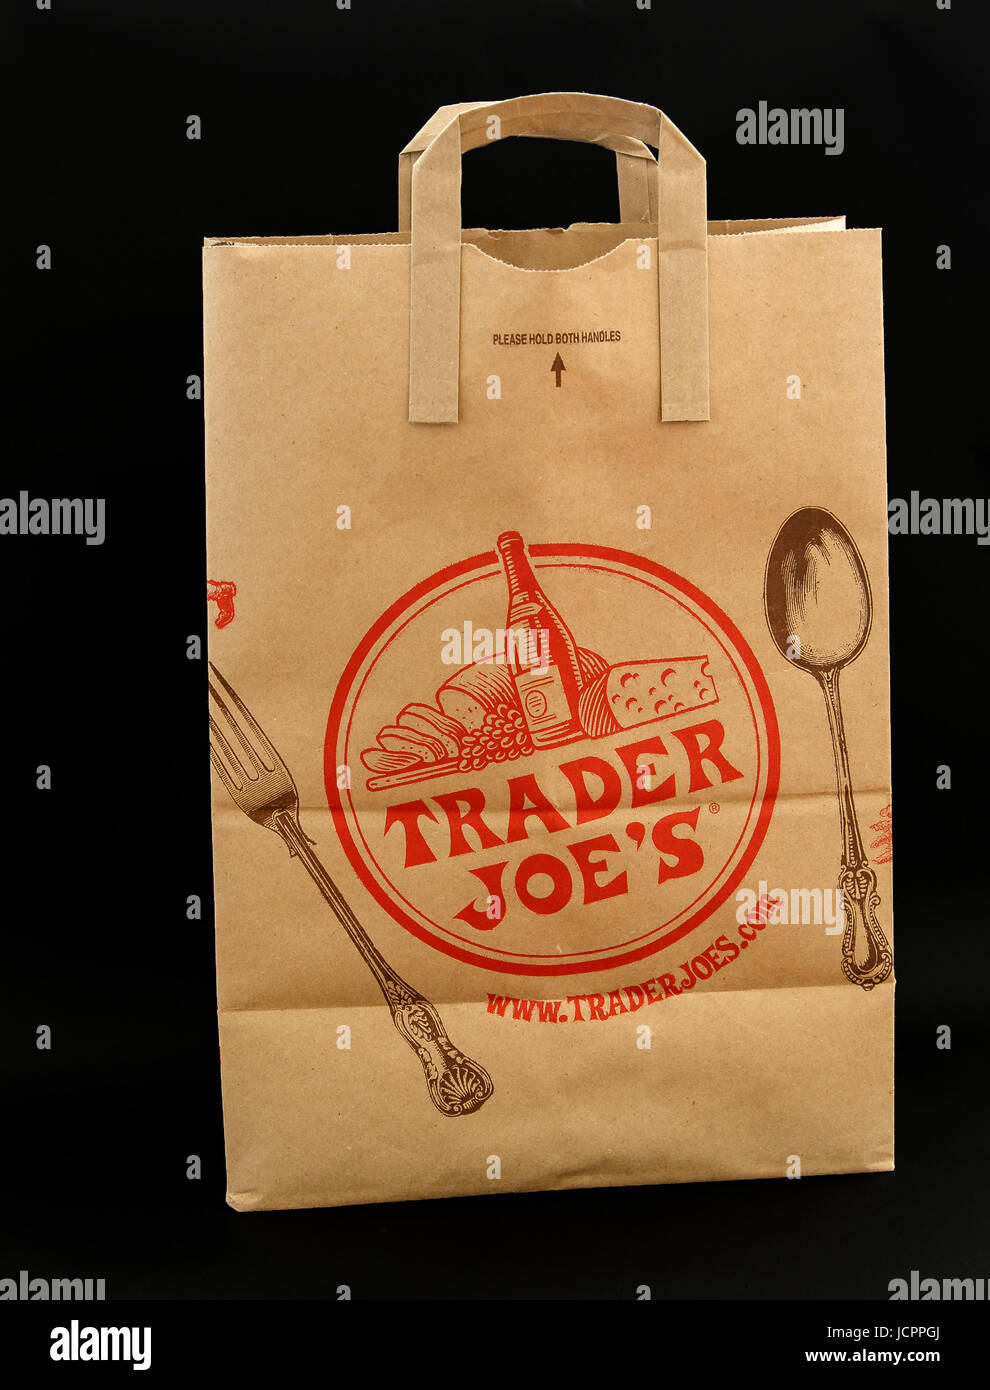 Trader Joes Store Stock Photos & Trader Joes Store Stock Images - Alamy